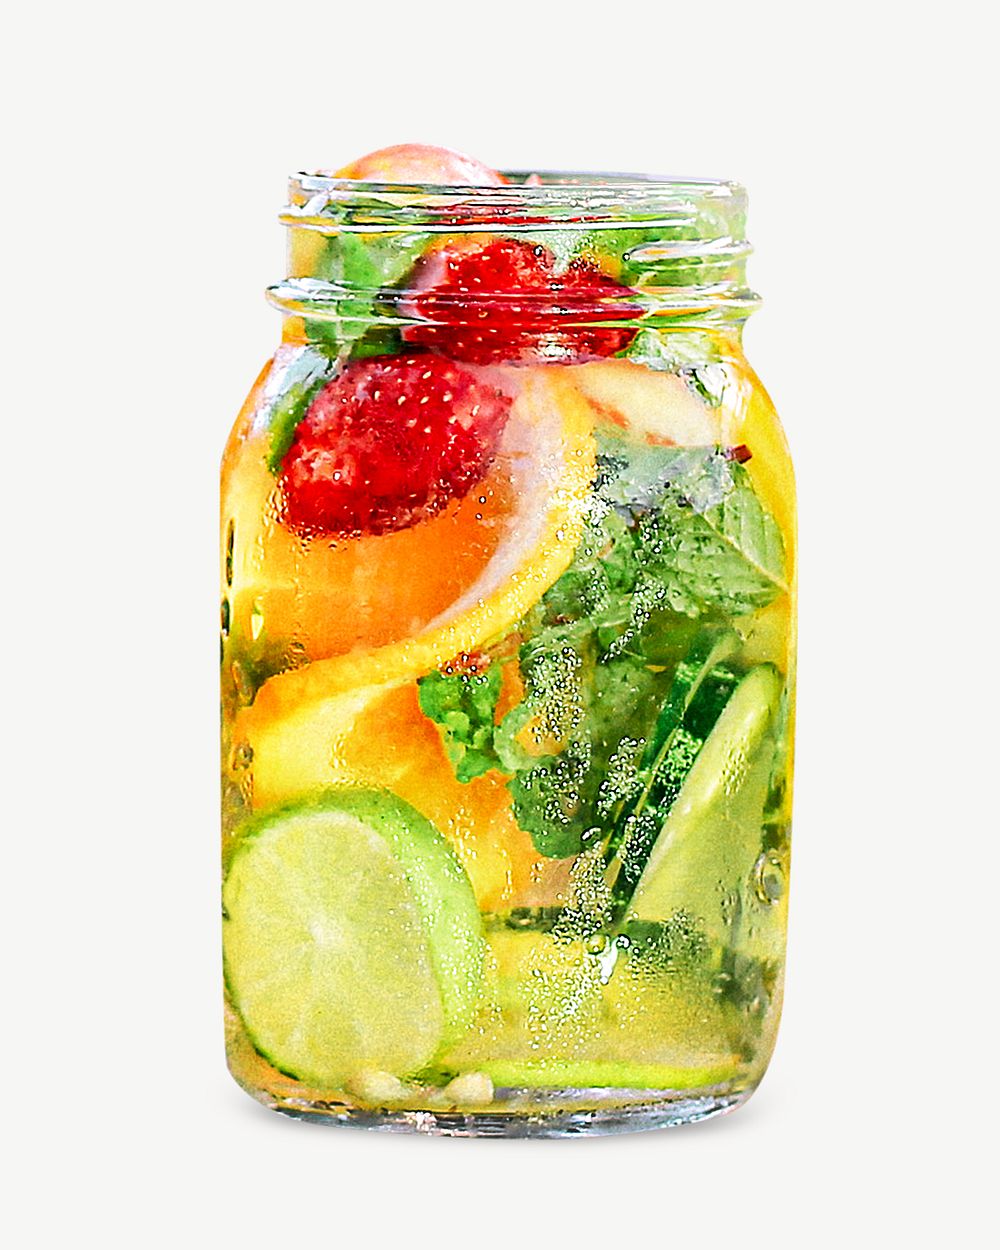 Infused water design element psd